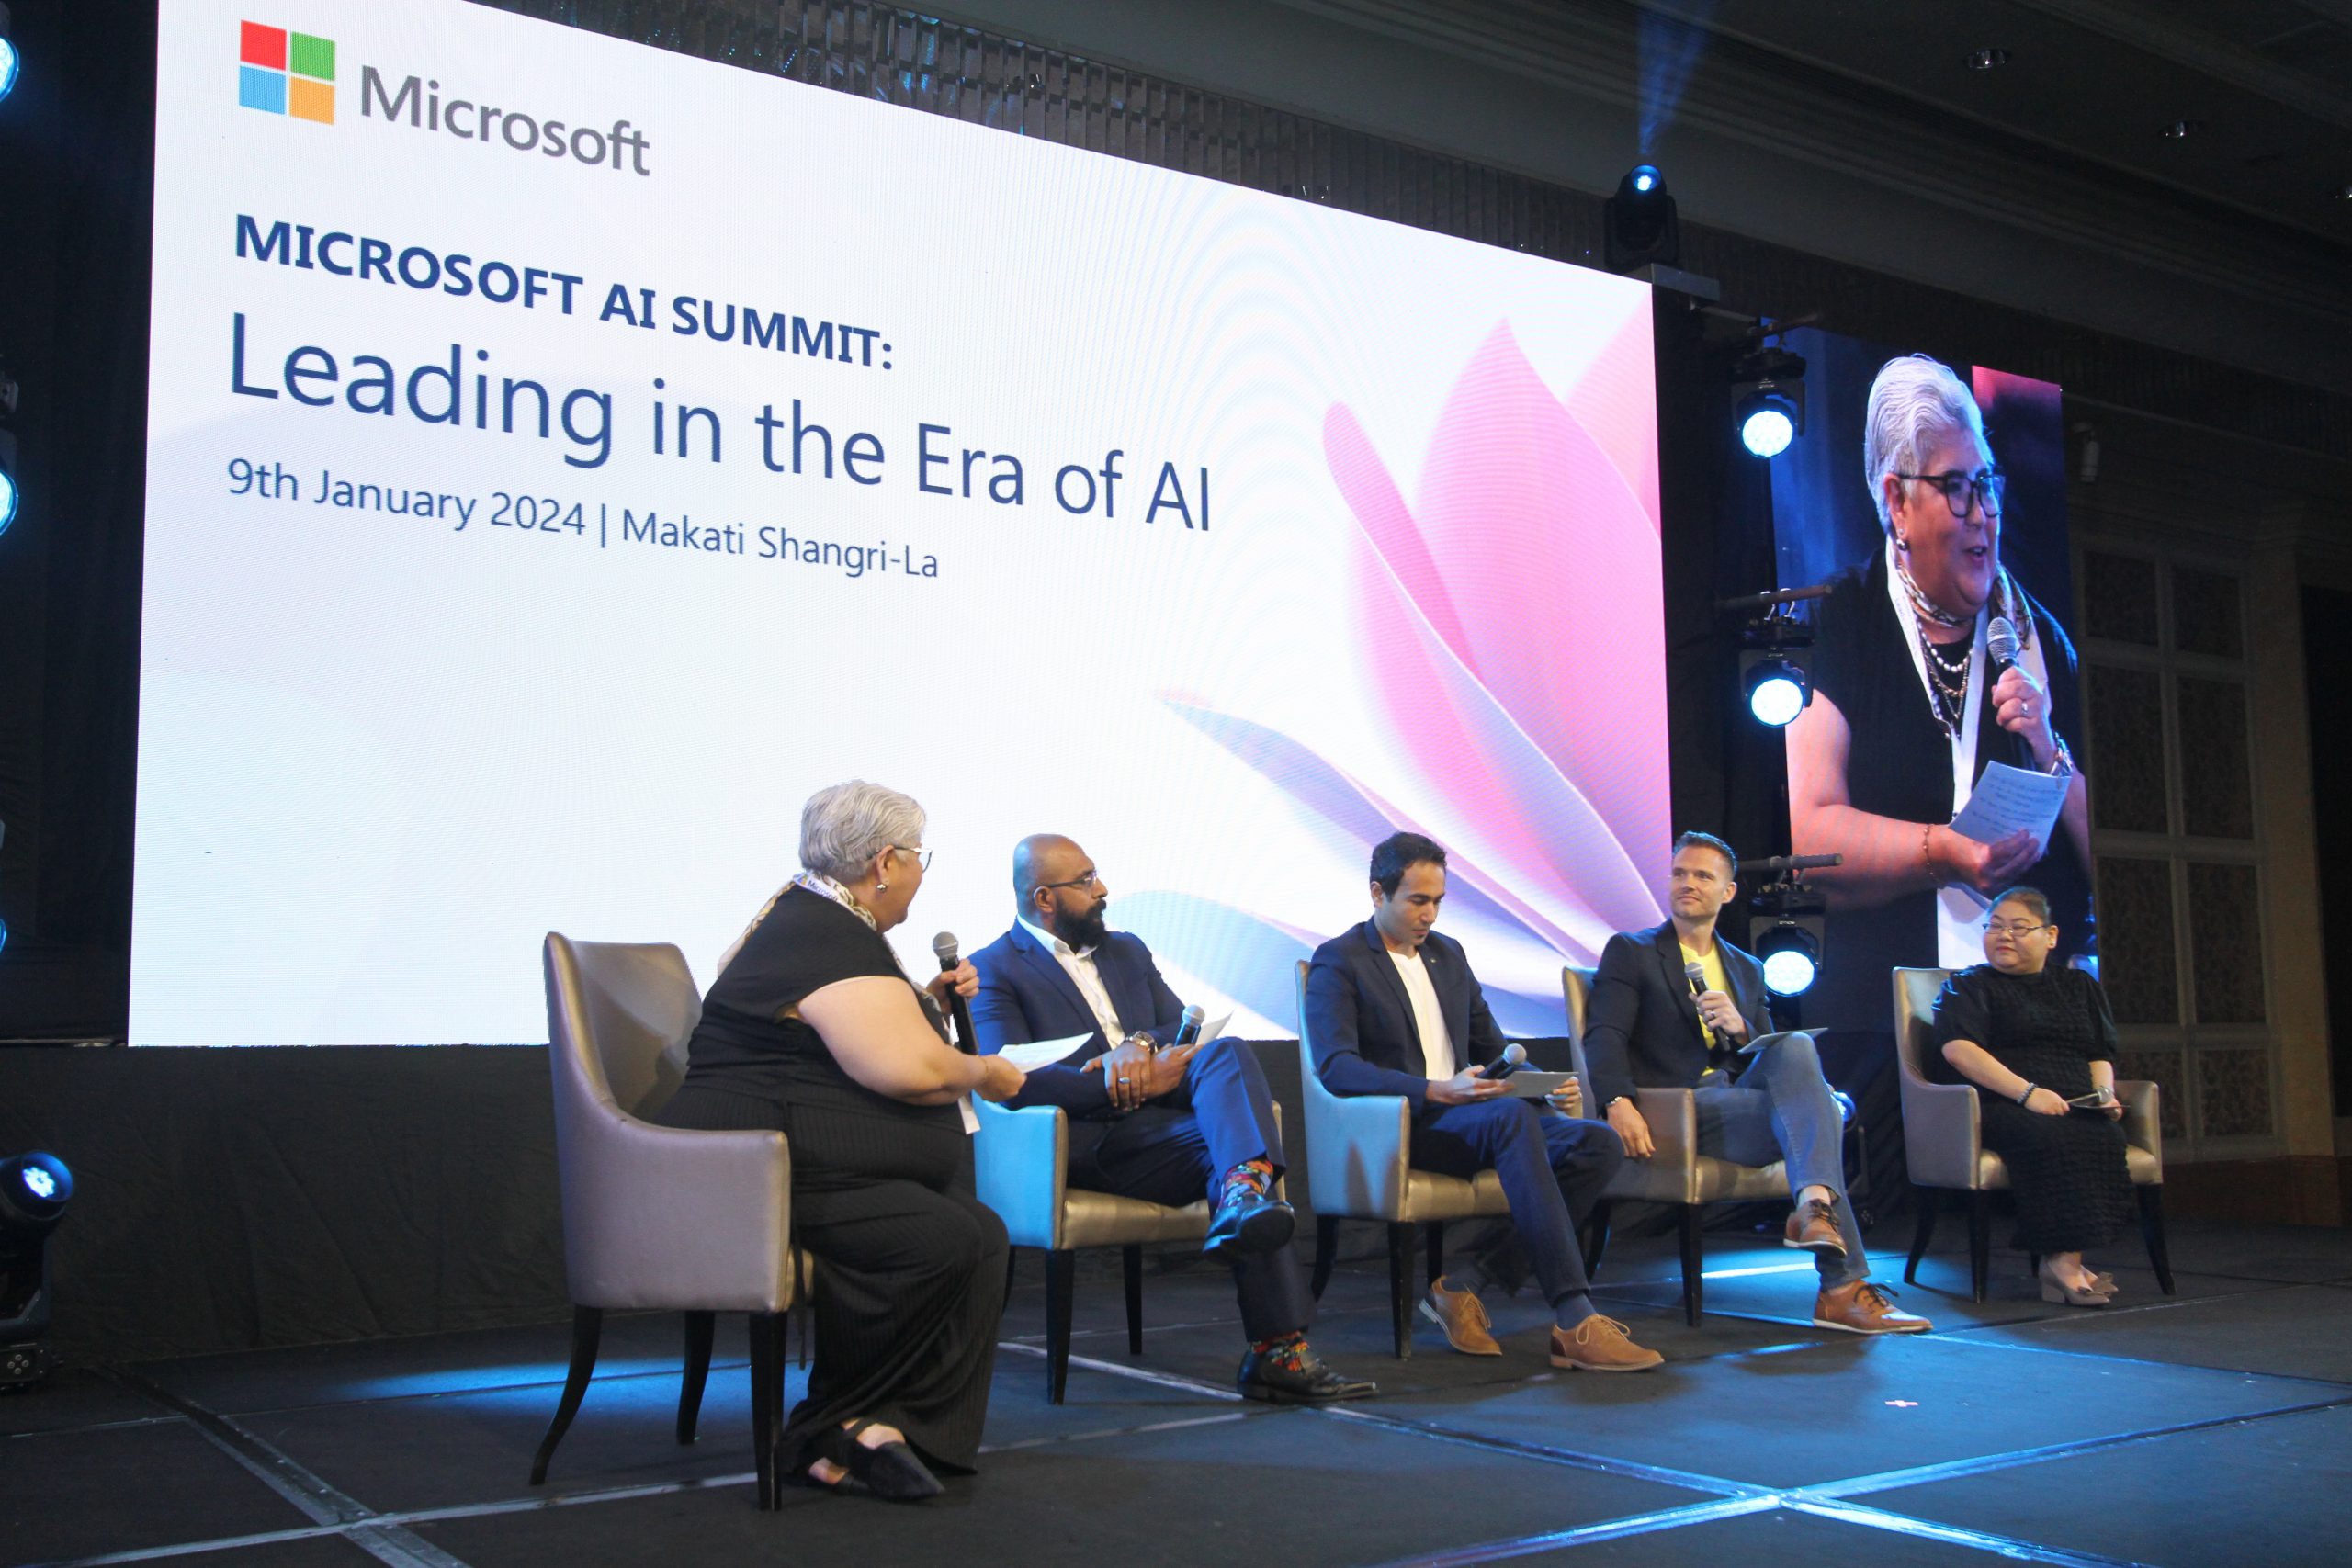 A panel of executives discussing AI at Microsoft Philippines' AI Summit event in January 2024.